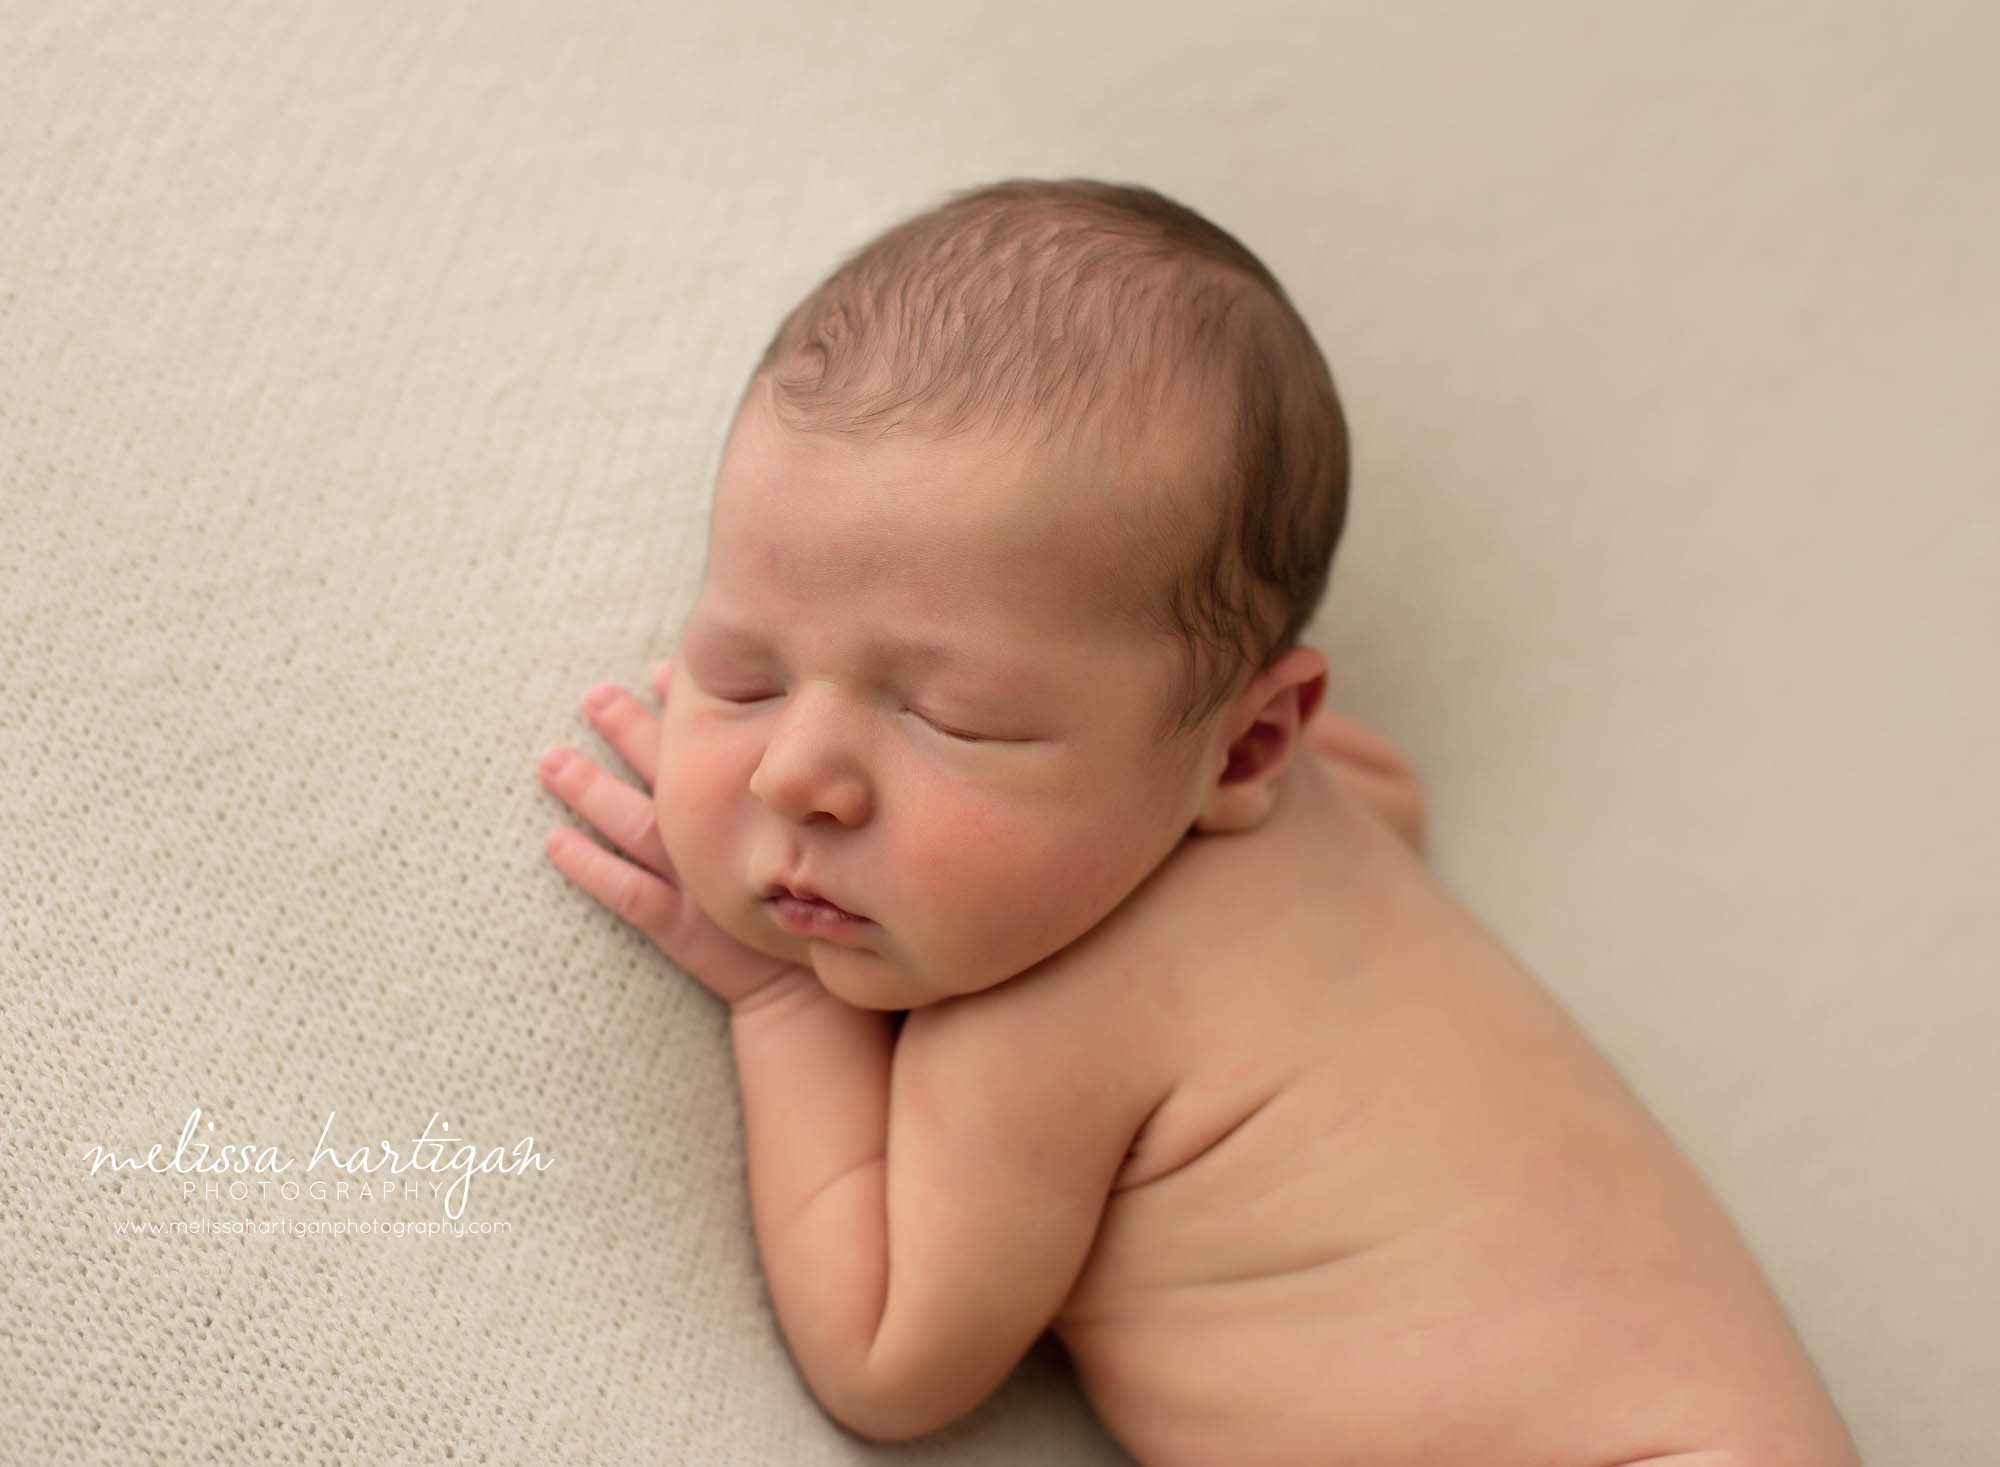 Newborn baby boy posed on side with hand under chin